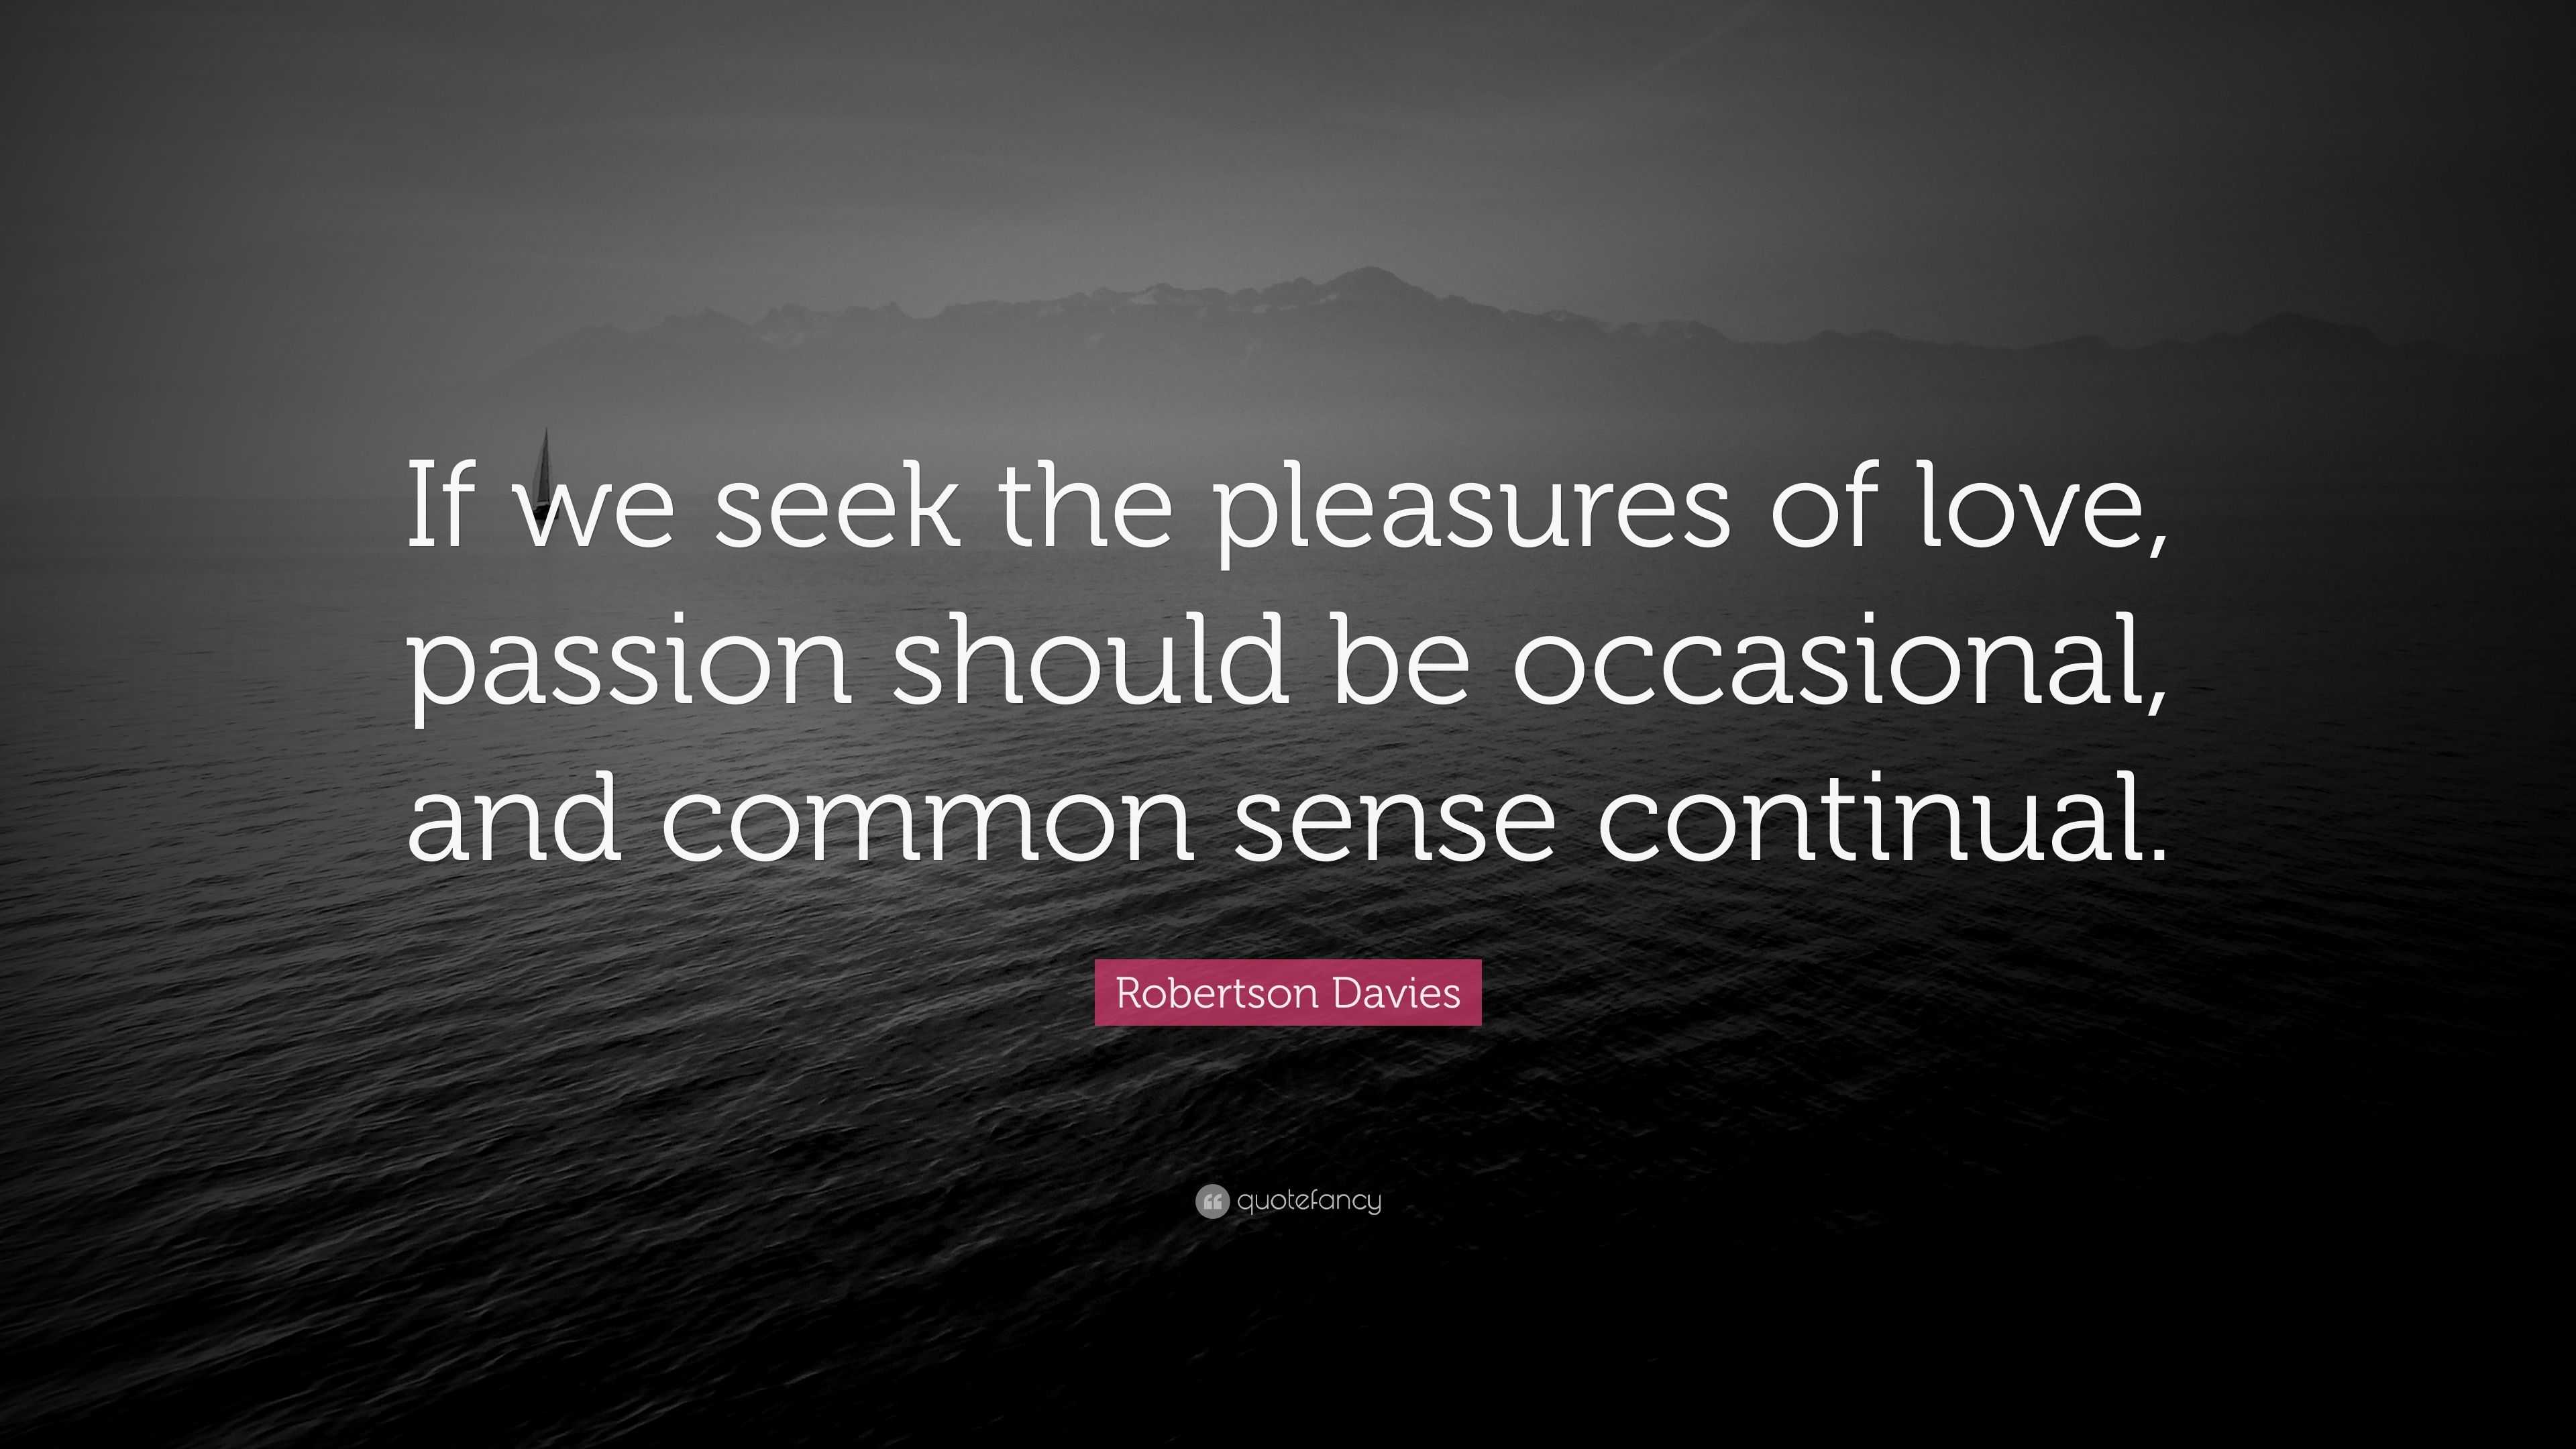 Robertson Davies Quote “If we seek the pleasures of love passion should be